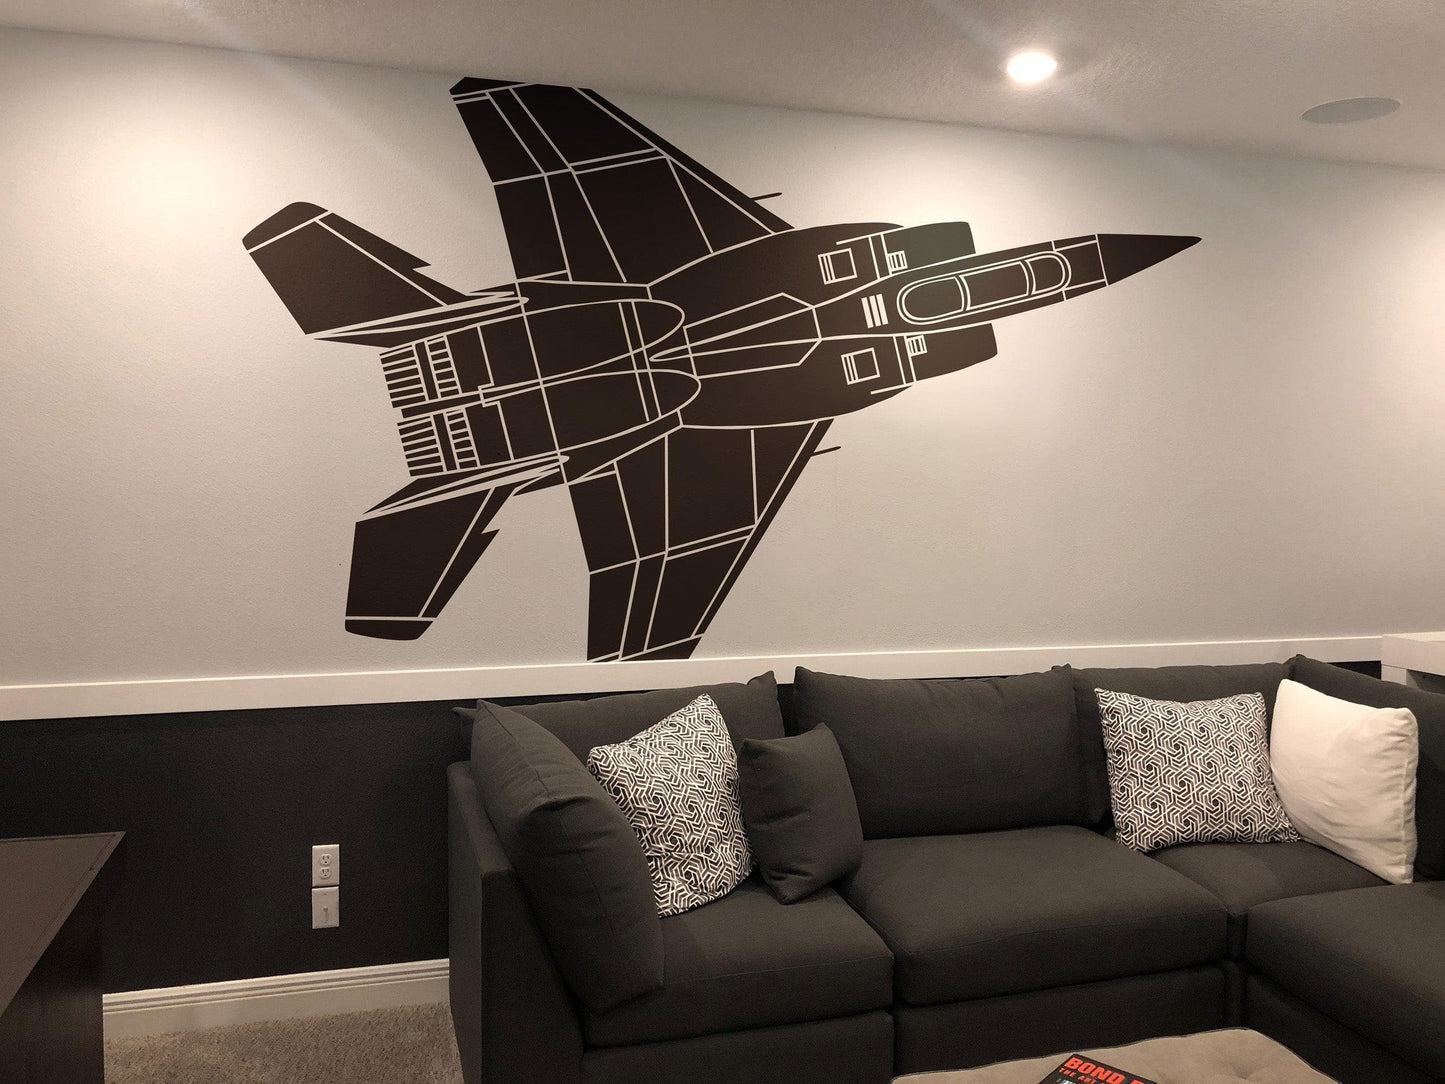 F15 Fighter Jet Wall Decal Sticker. USA, Army, Air Force, Marine, Veterans Decor. #529